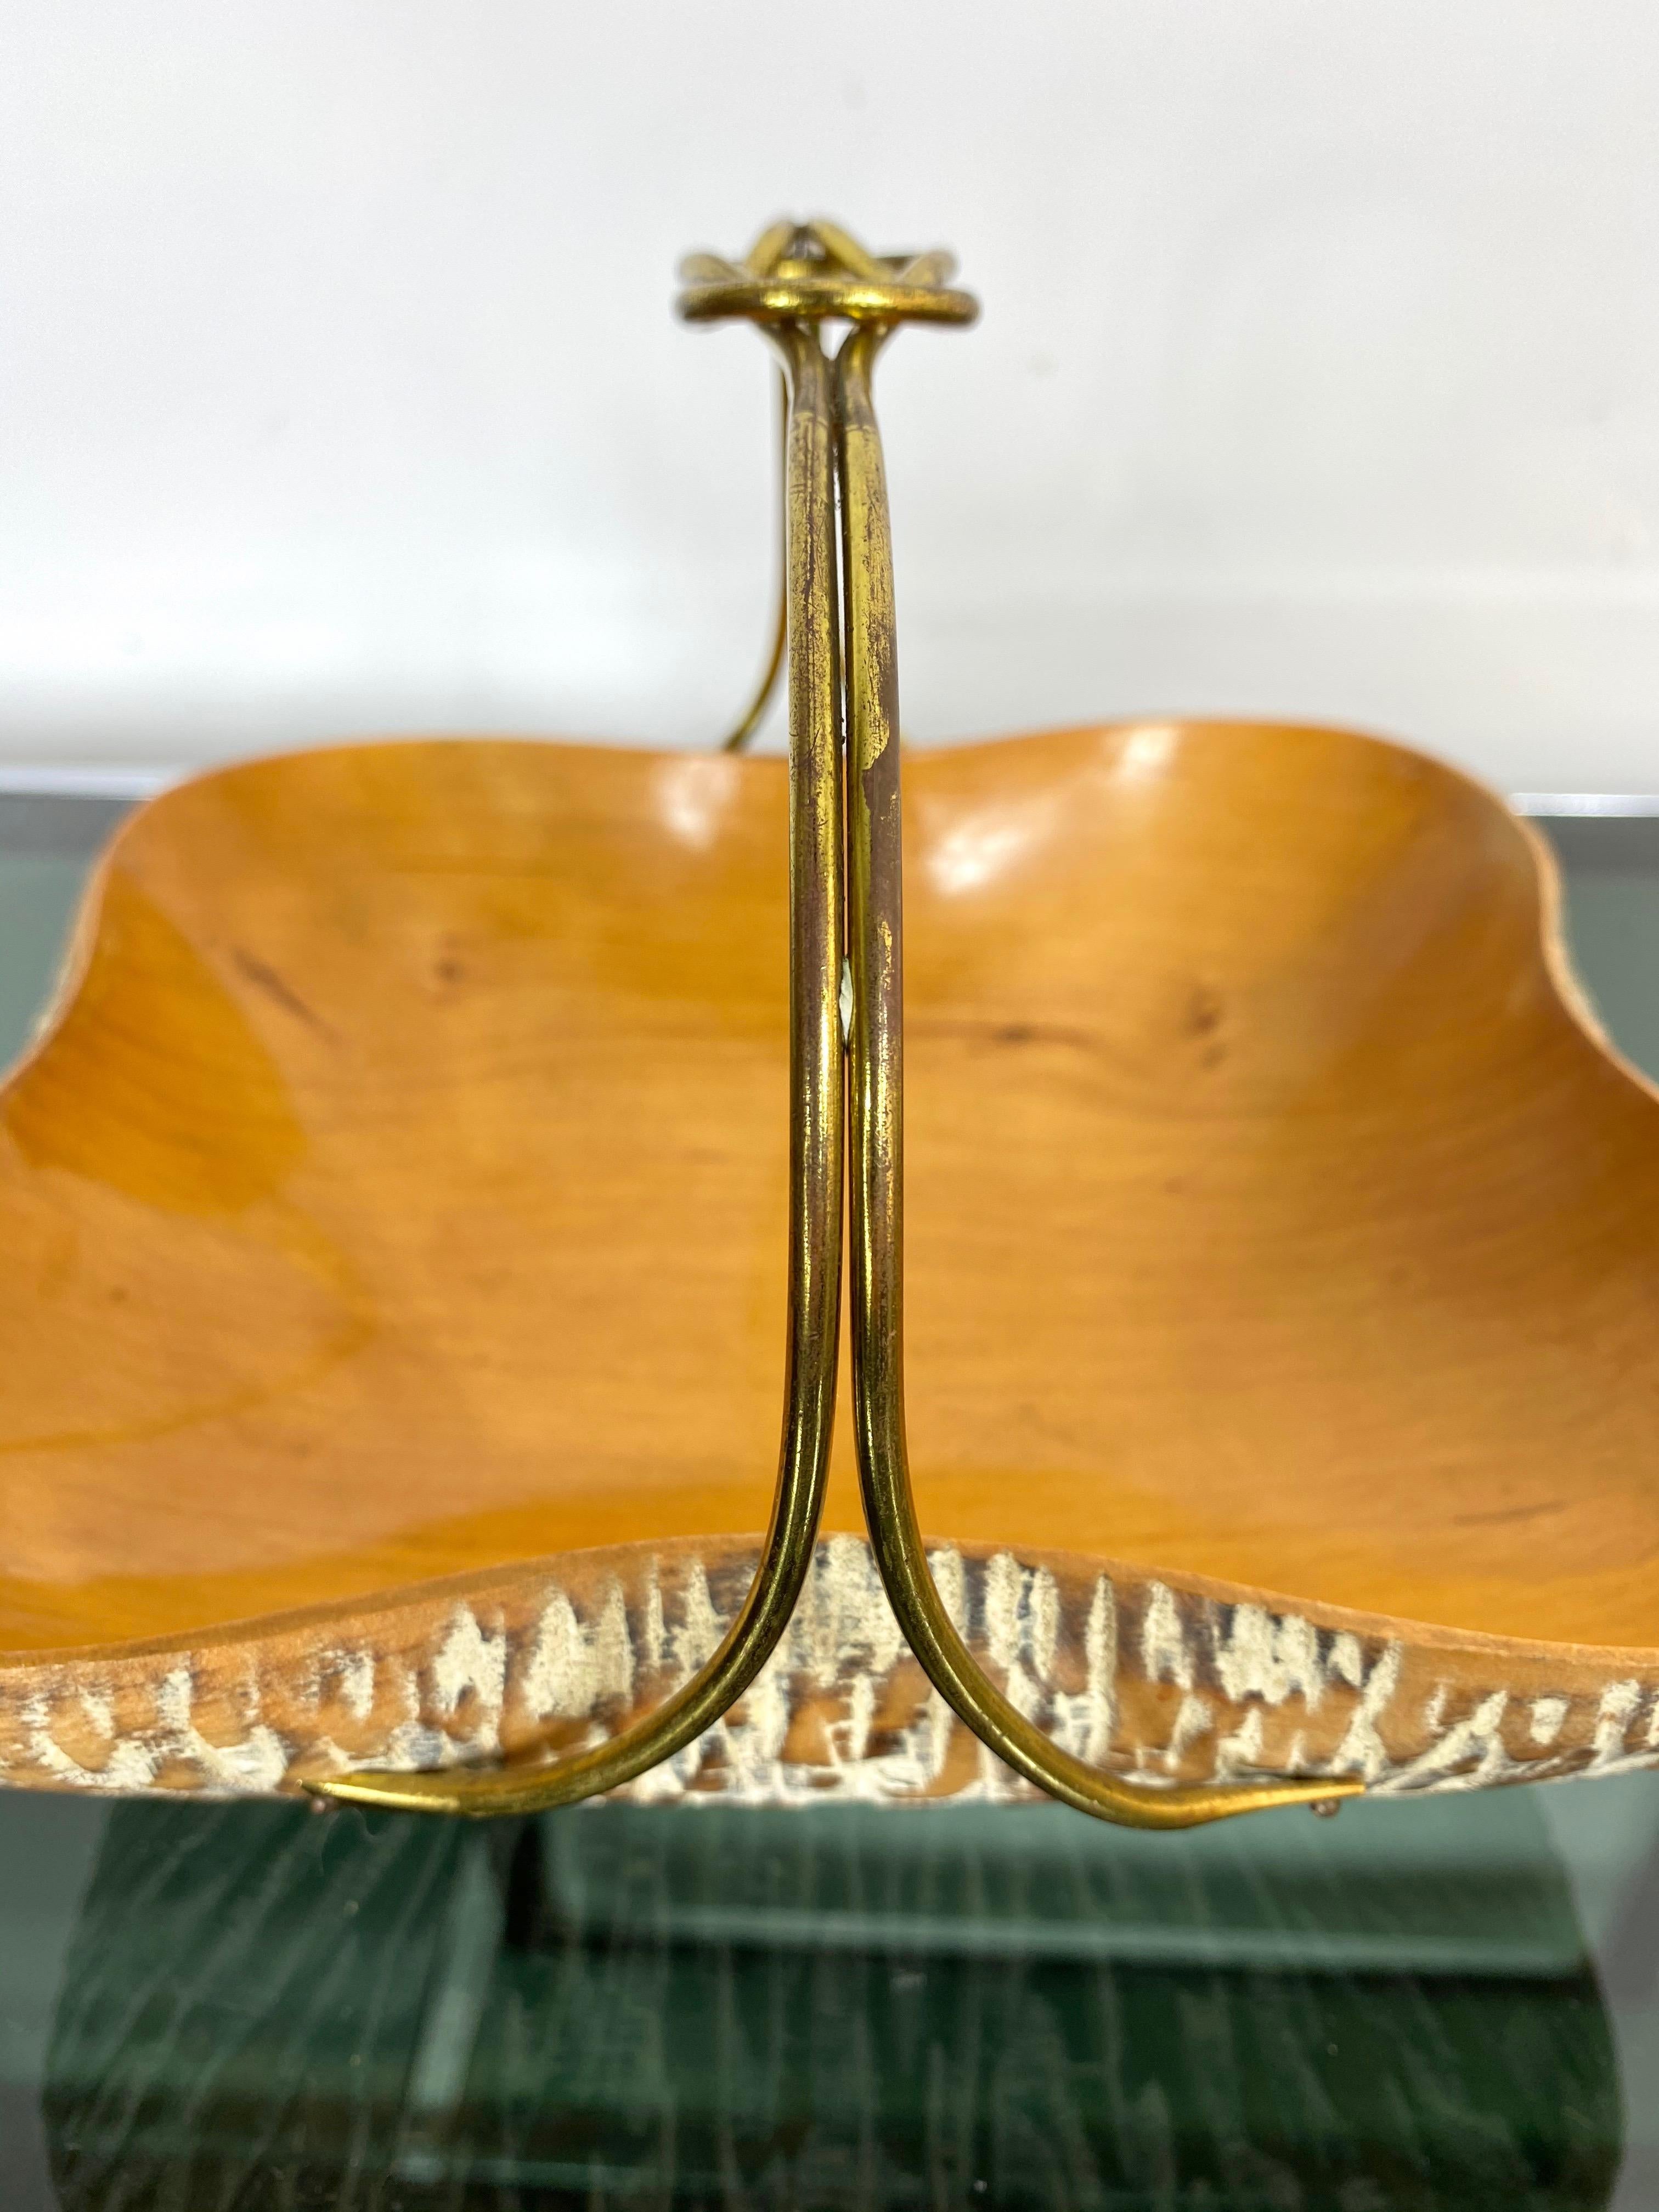 Aldo Tura for Macabo Walnut Bowl Basket Centrepiece Wood and Brass, Italy, 1950s For Sale 4